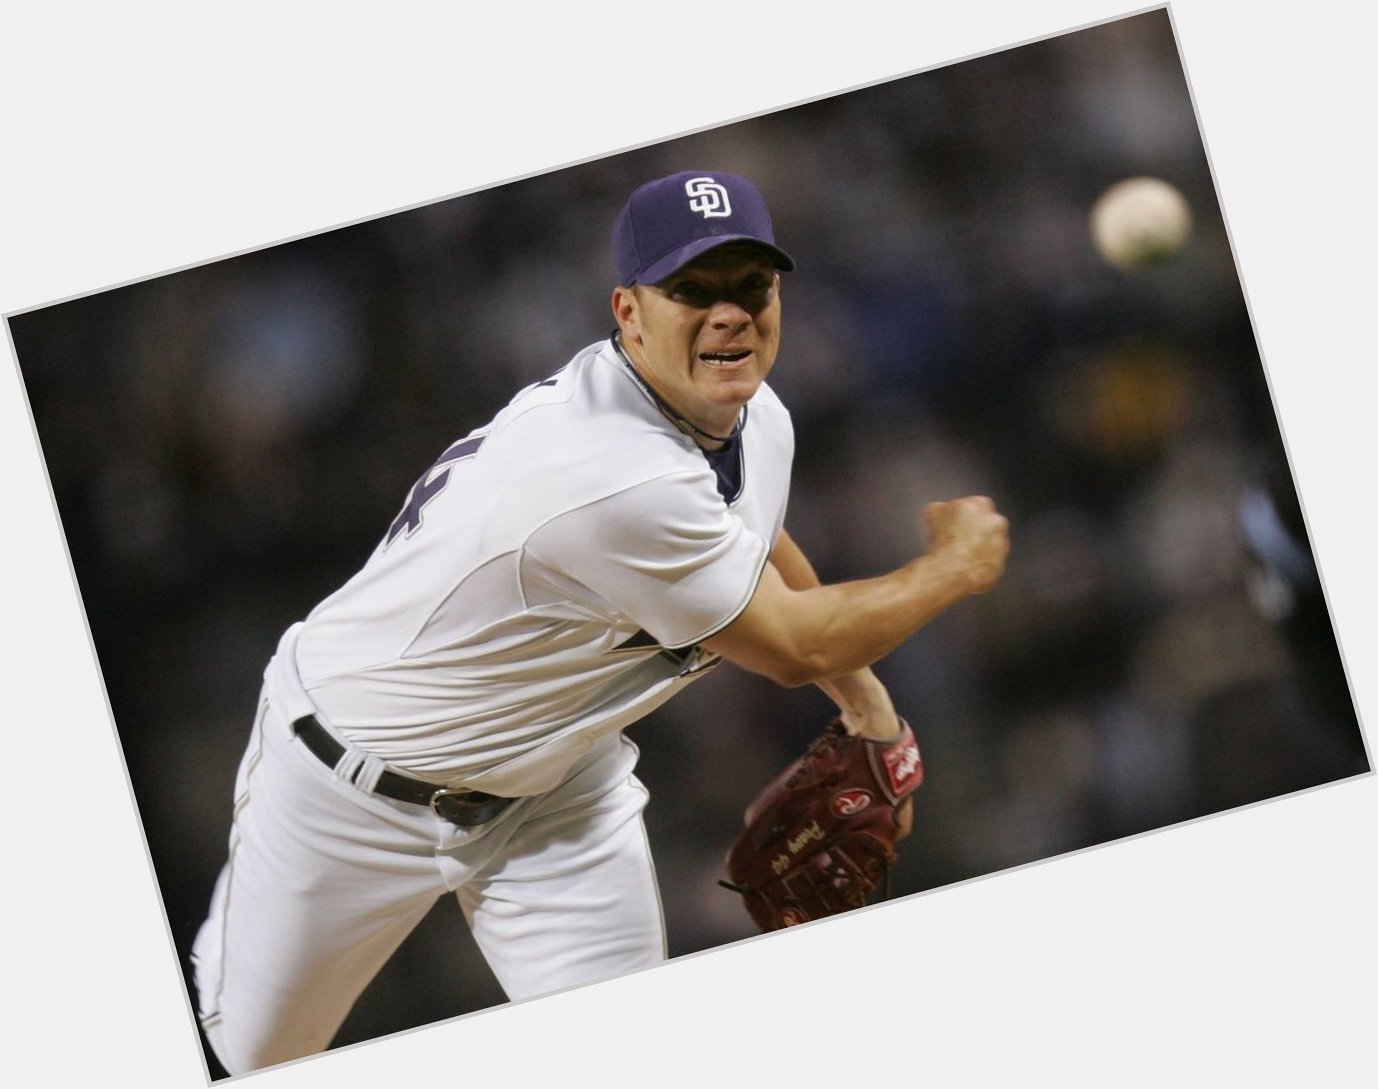 Happy birthday to former Cy Young Award winner and 2 time World Series champion Jake Peavy 